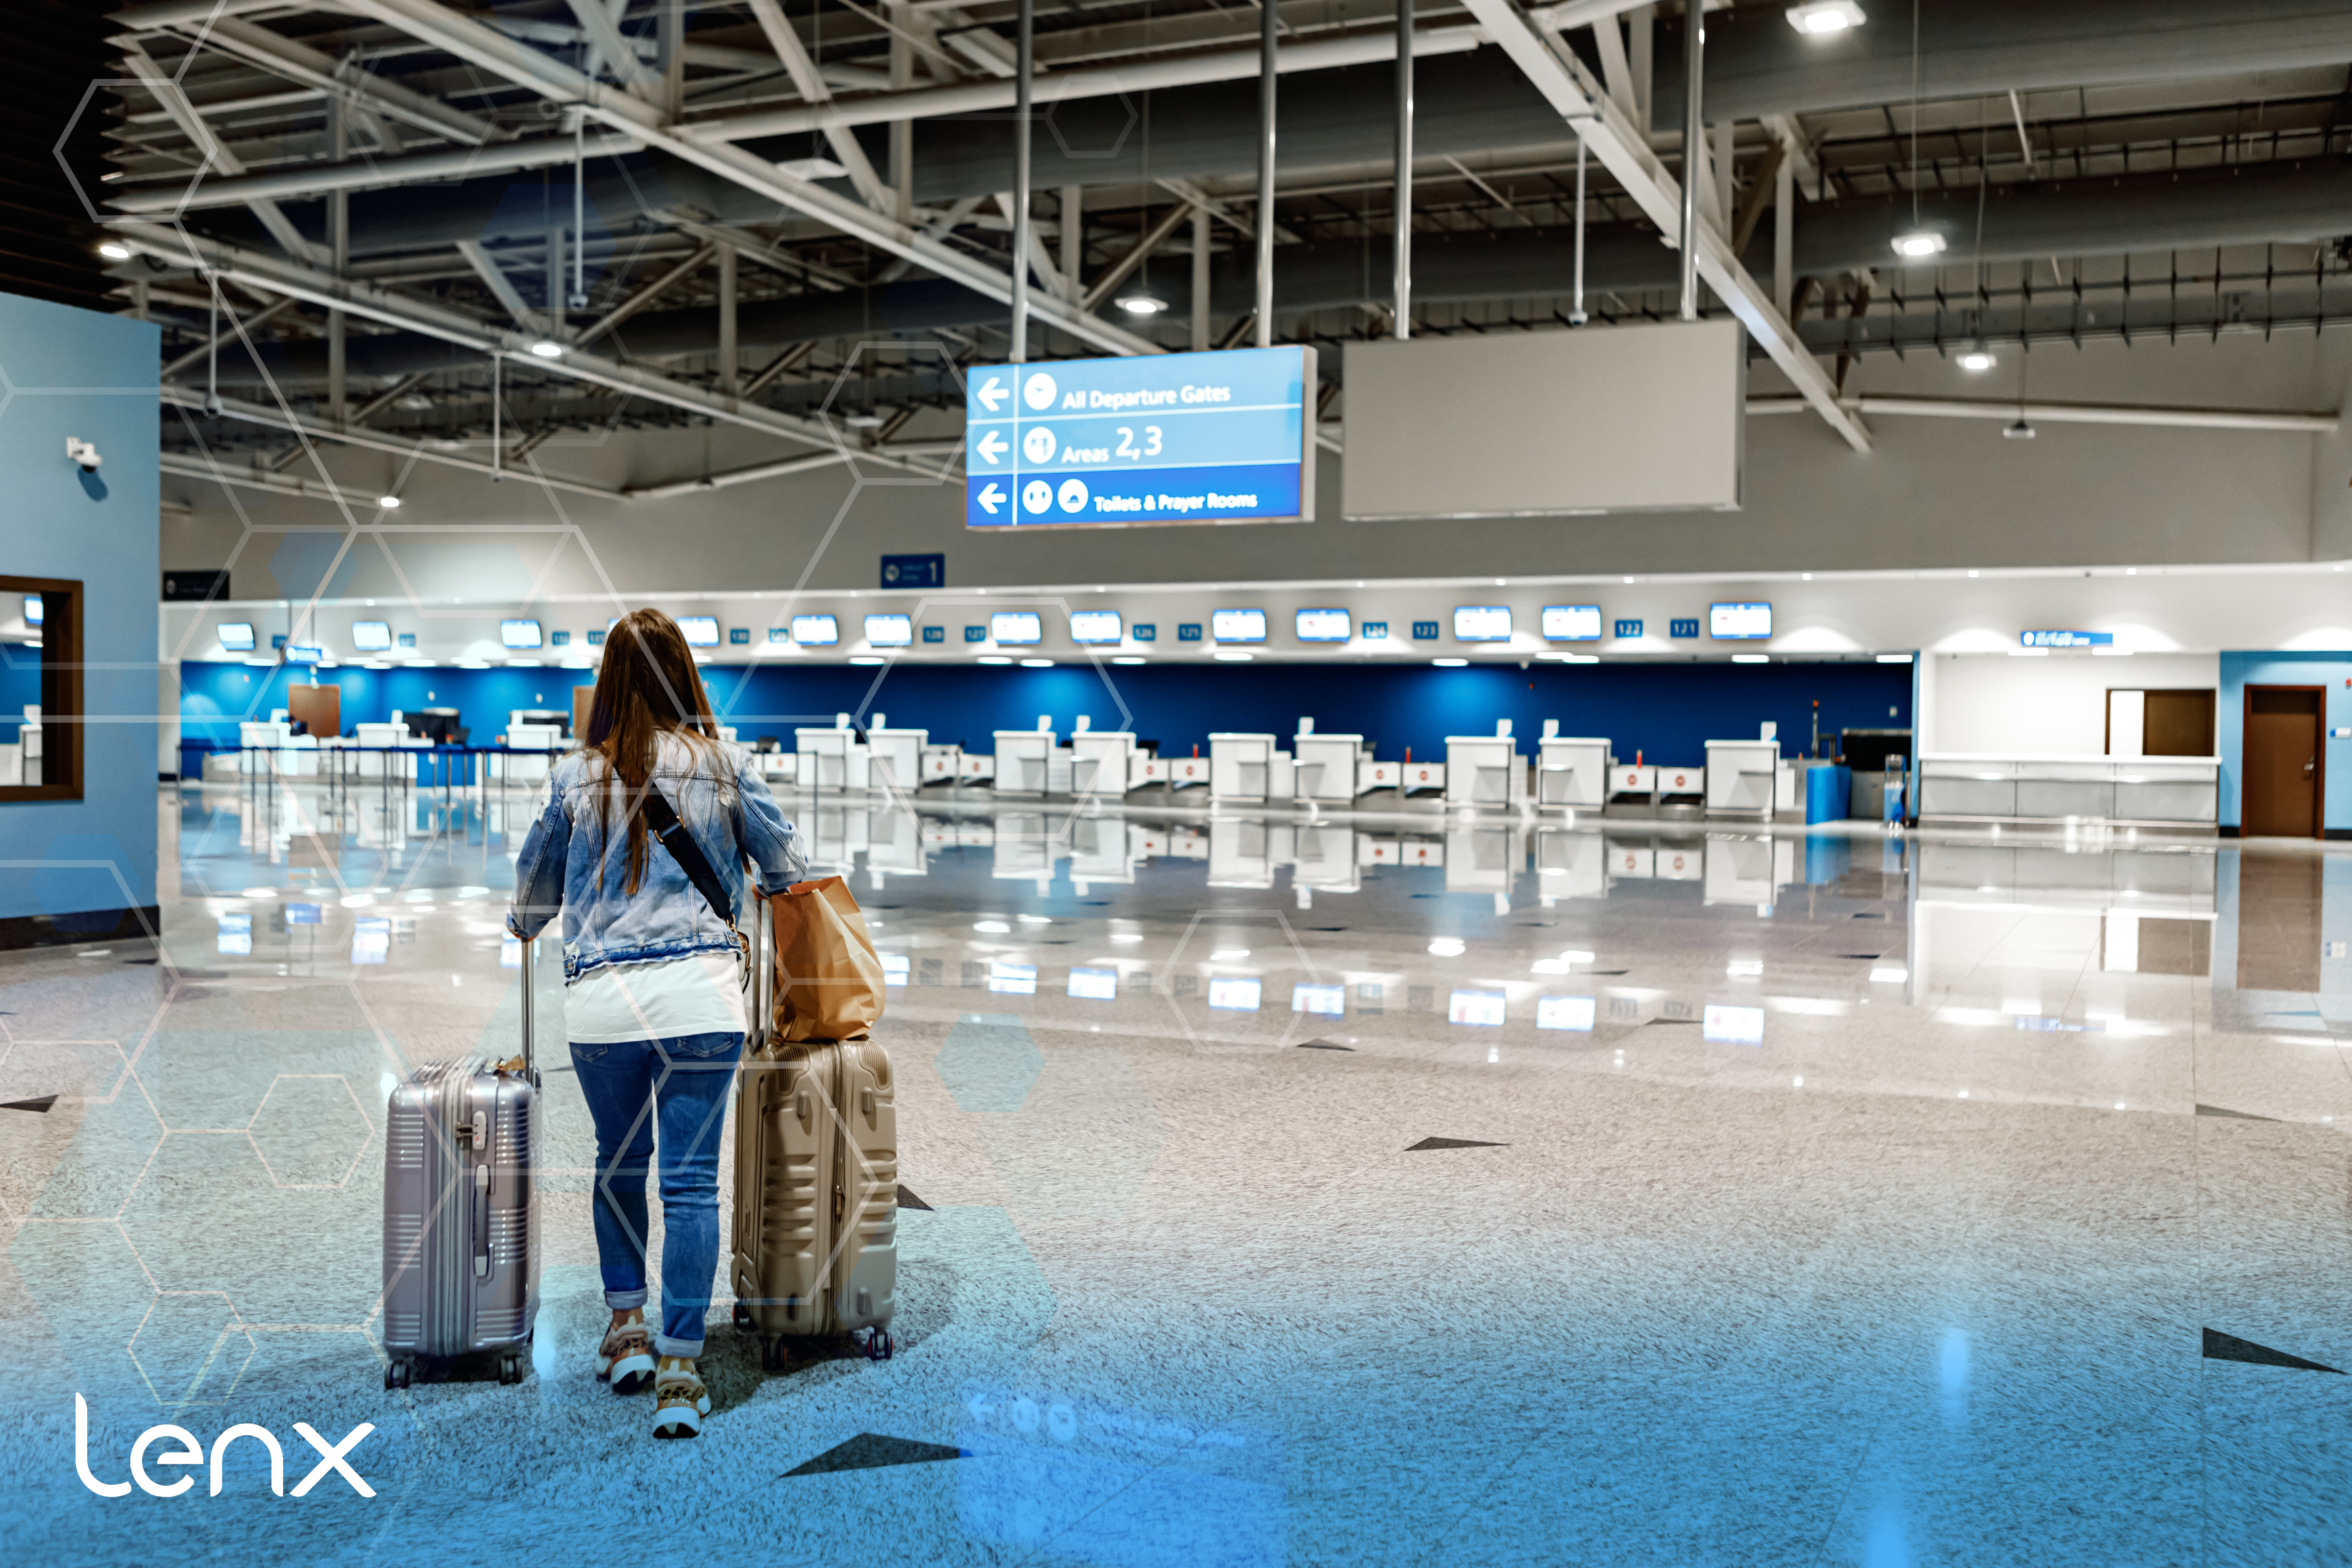 Combining Airport Security With Active Shooter Detection And AI Security Systems